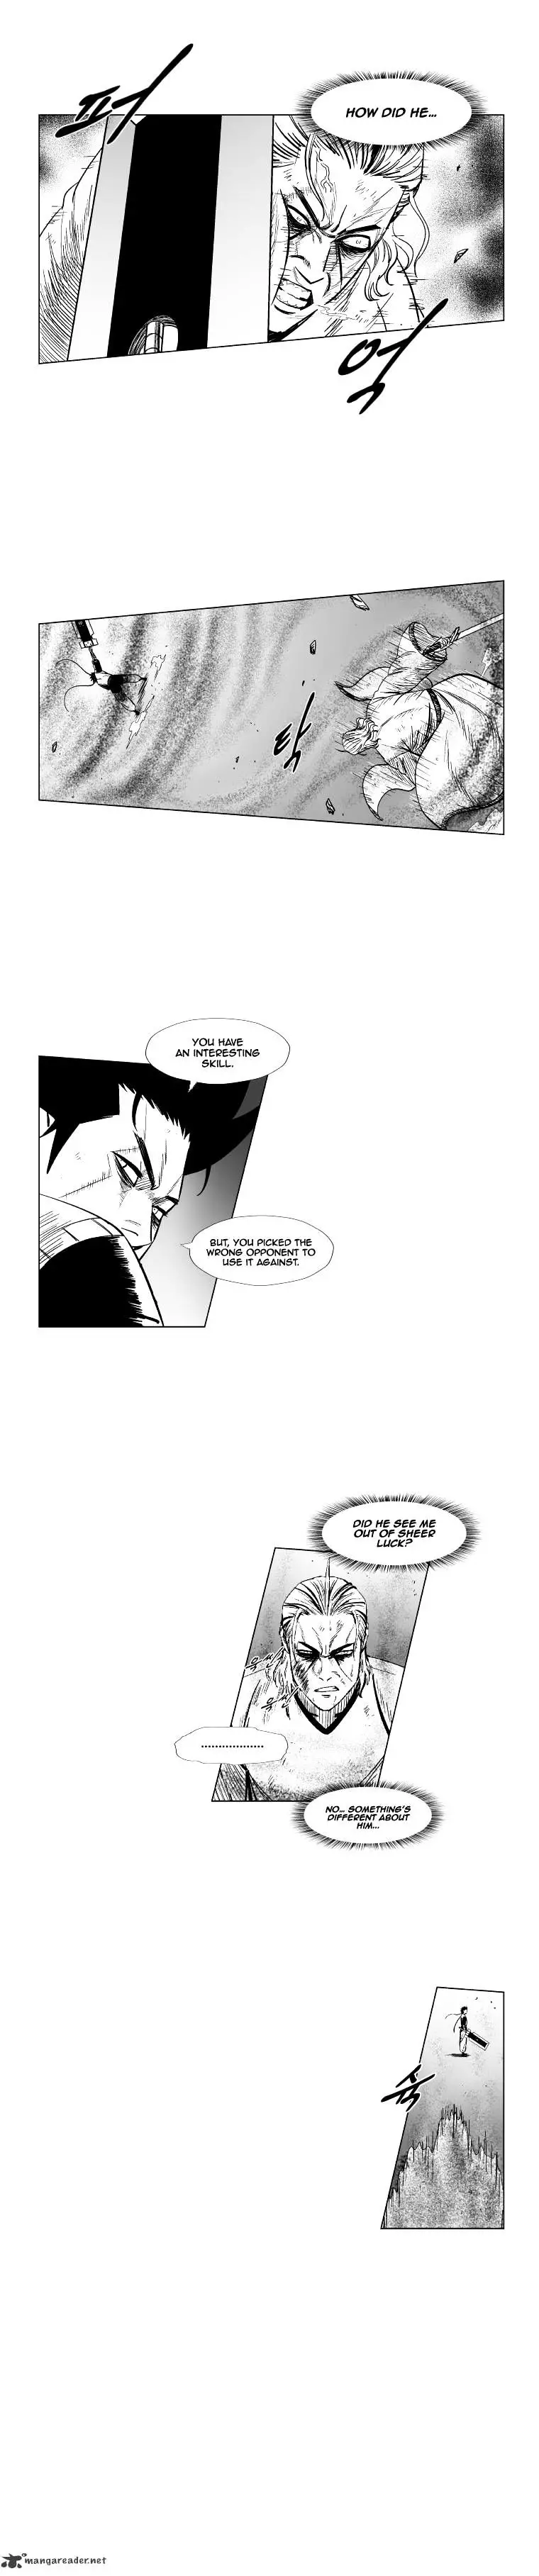 Red Storm - 170 page 4-88aab1ce